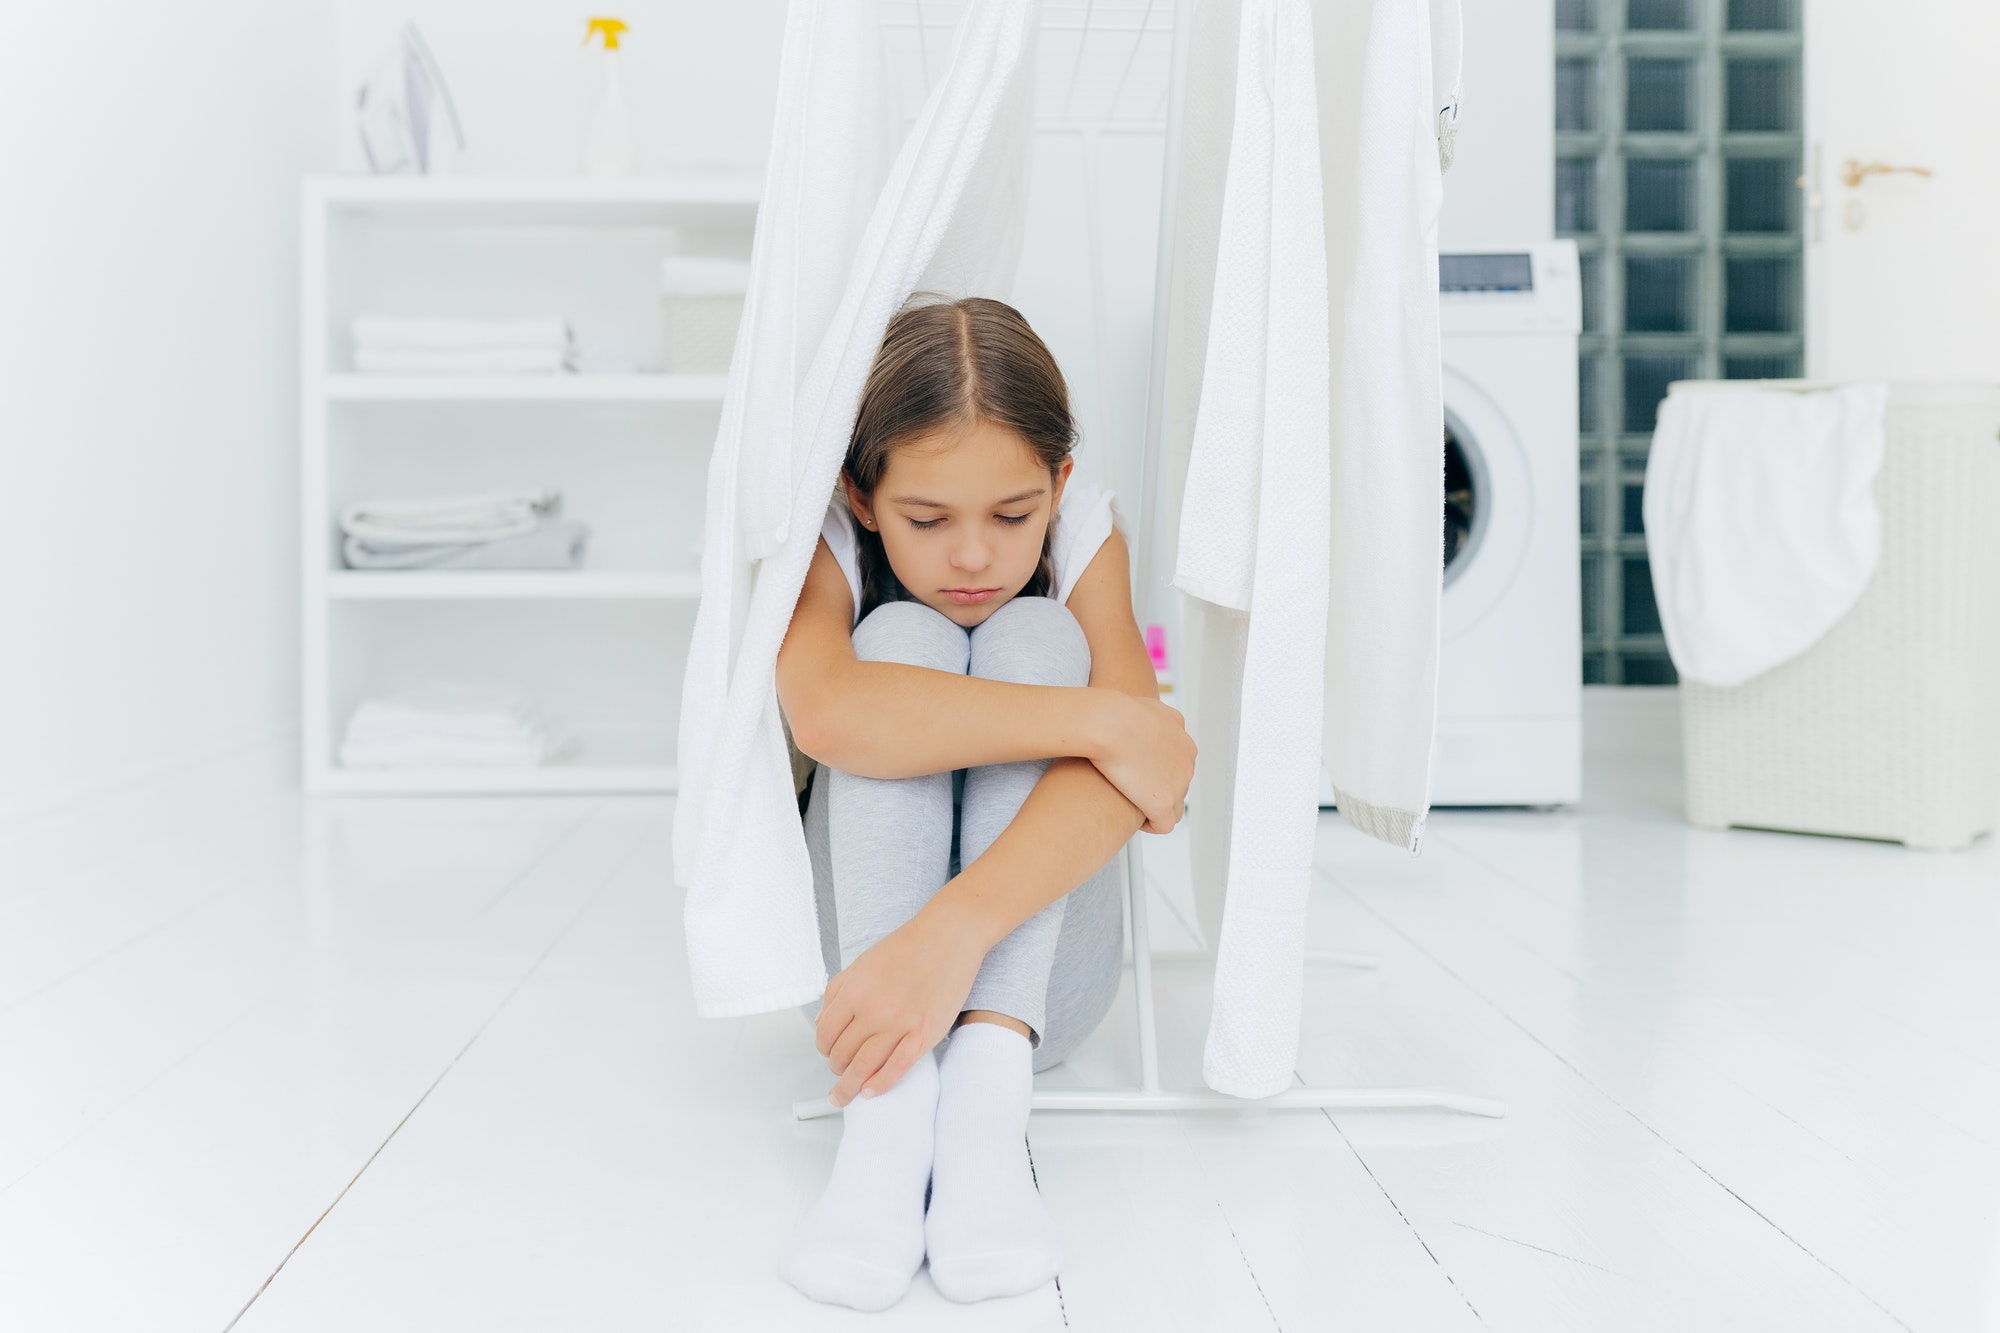 Lonely thoughtful sad small girl sits on floor in washing room near clothes dryer